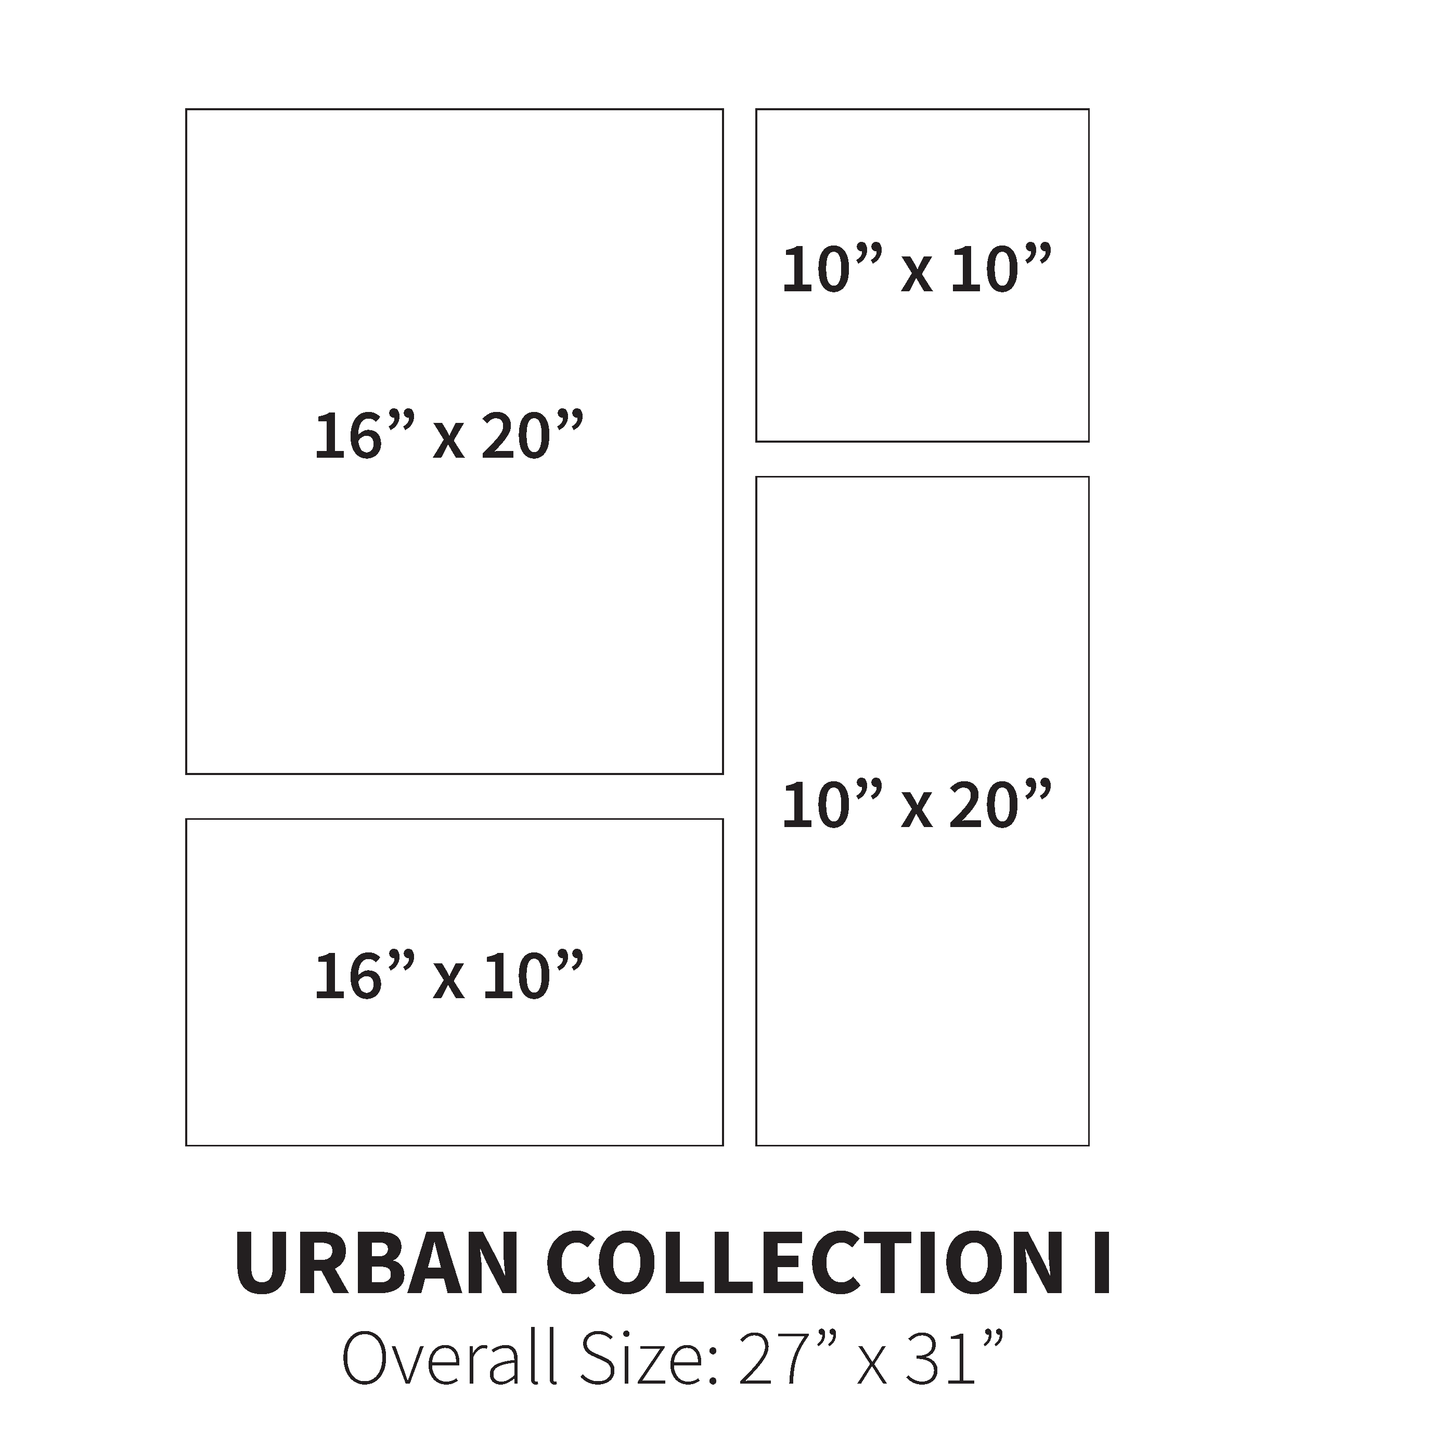 Urban Collection I (Overall Size: 27" x 31")